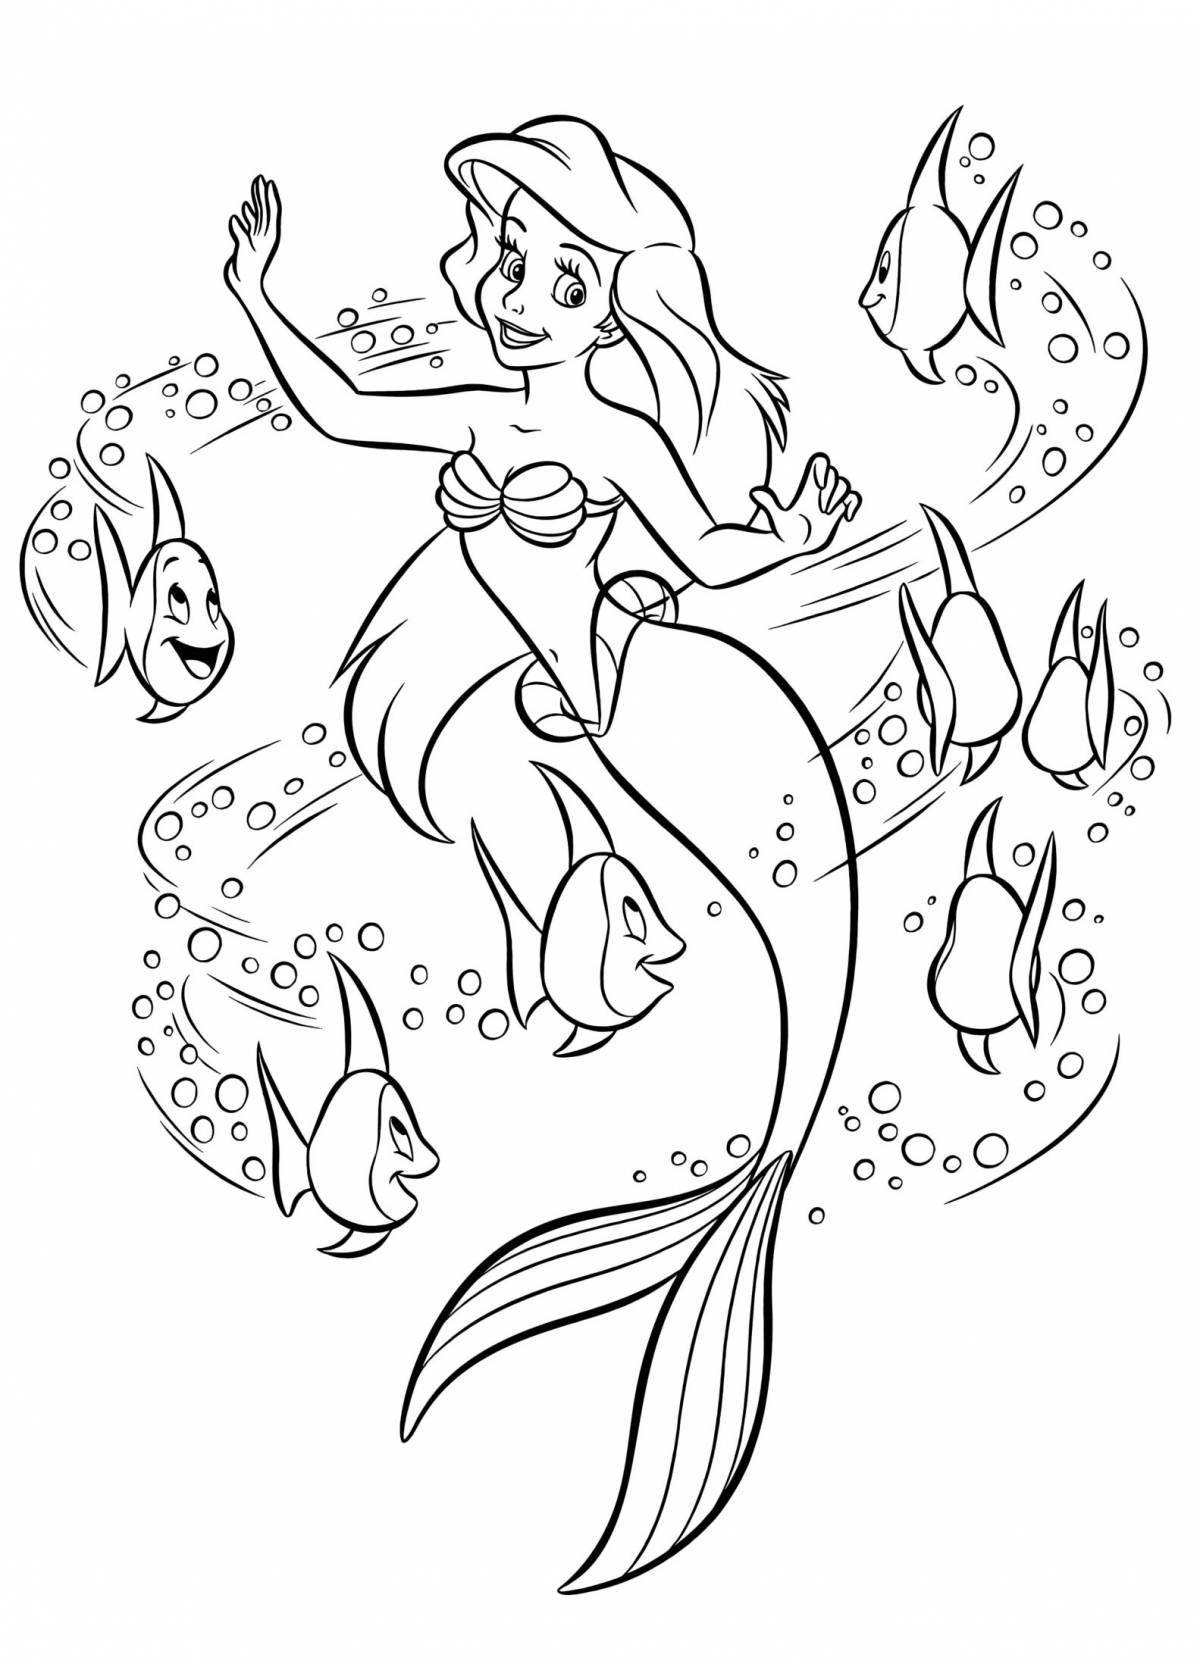 Mermaid jubilant coloring book for 4-5 year olds